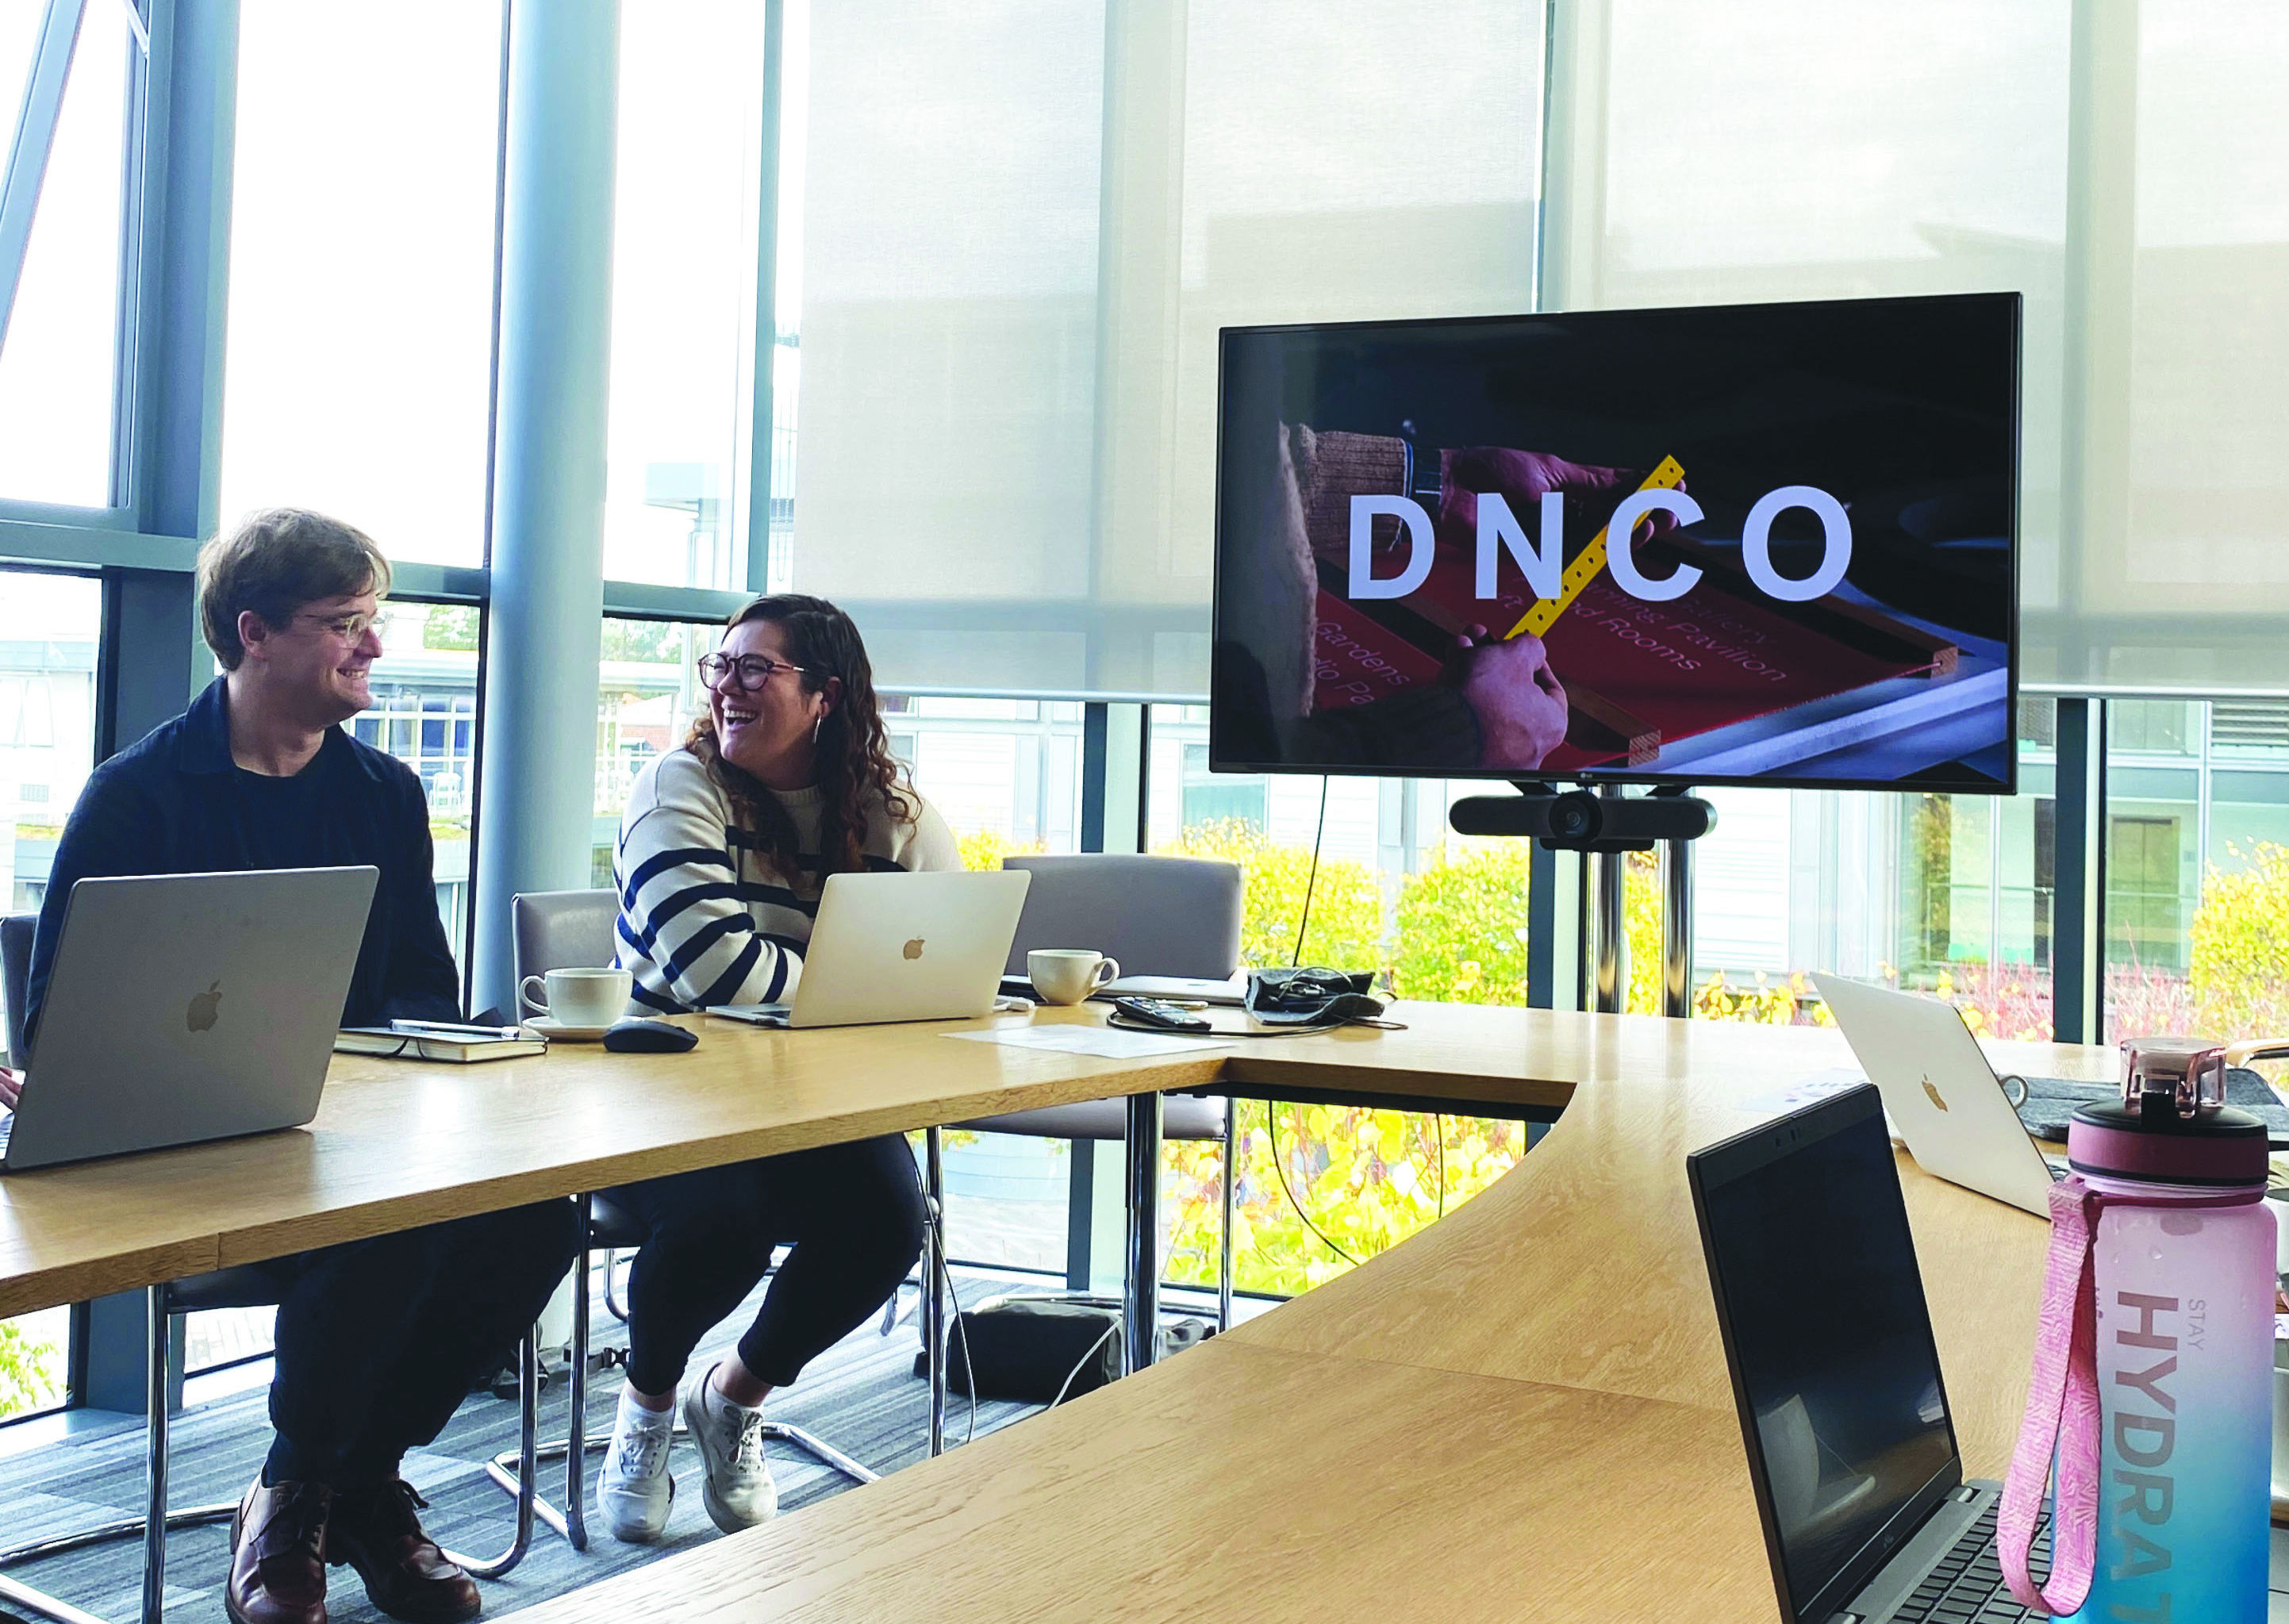 a photograph of a meeting table with dnco on the screen